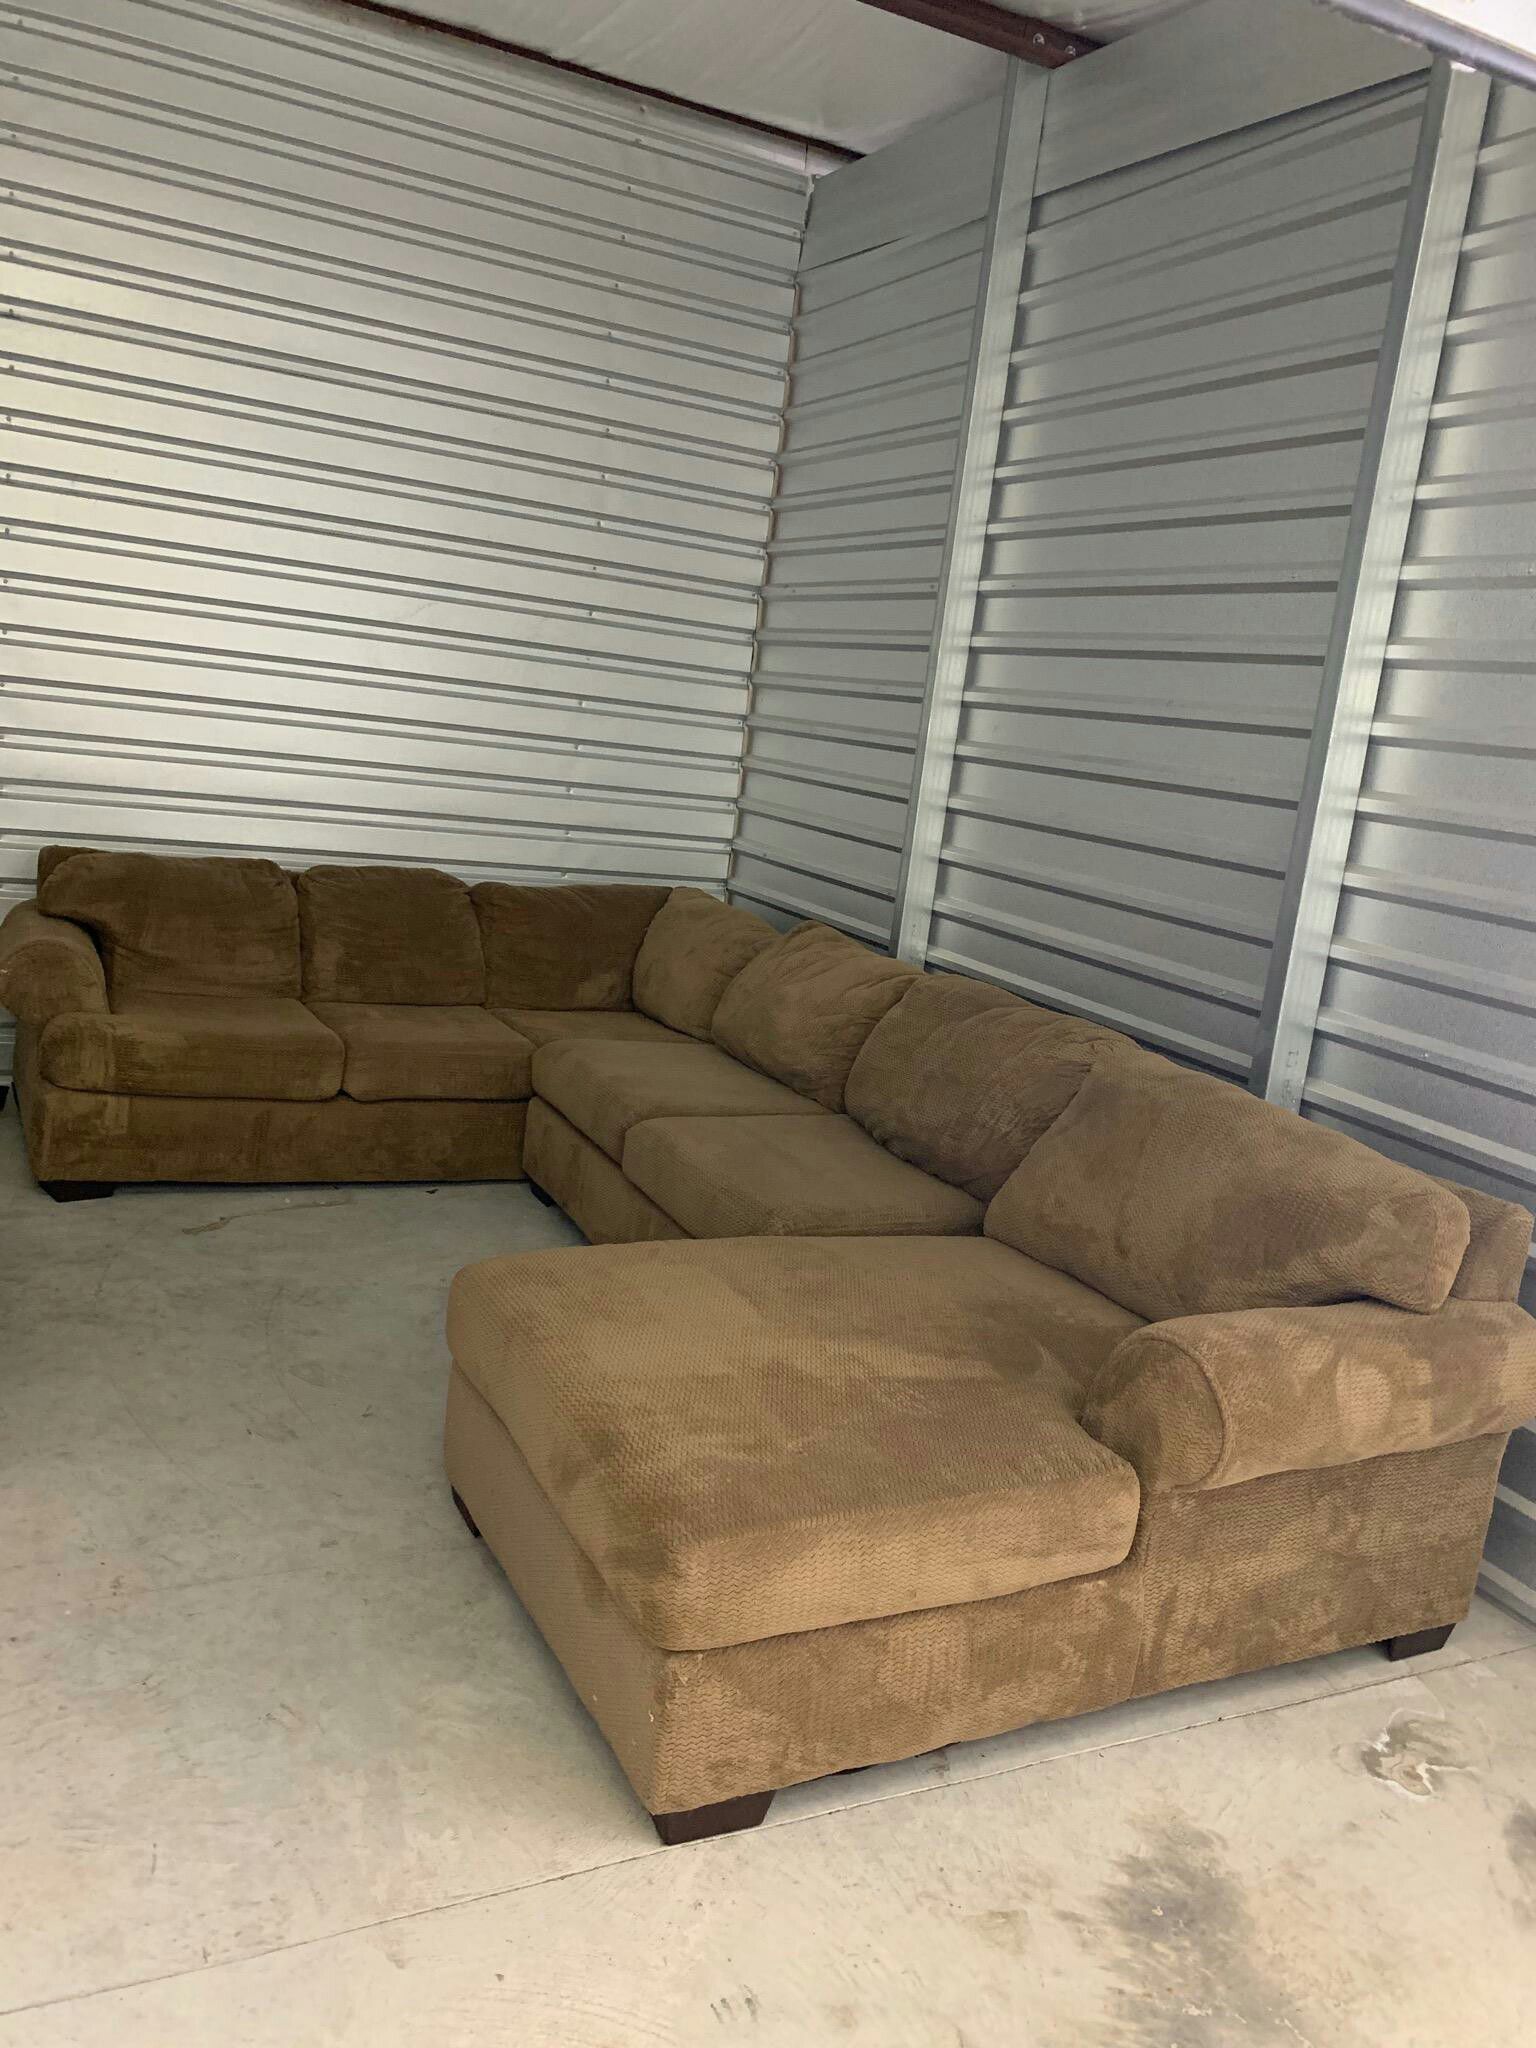 Large tan sectional couch / sofa